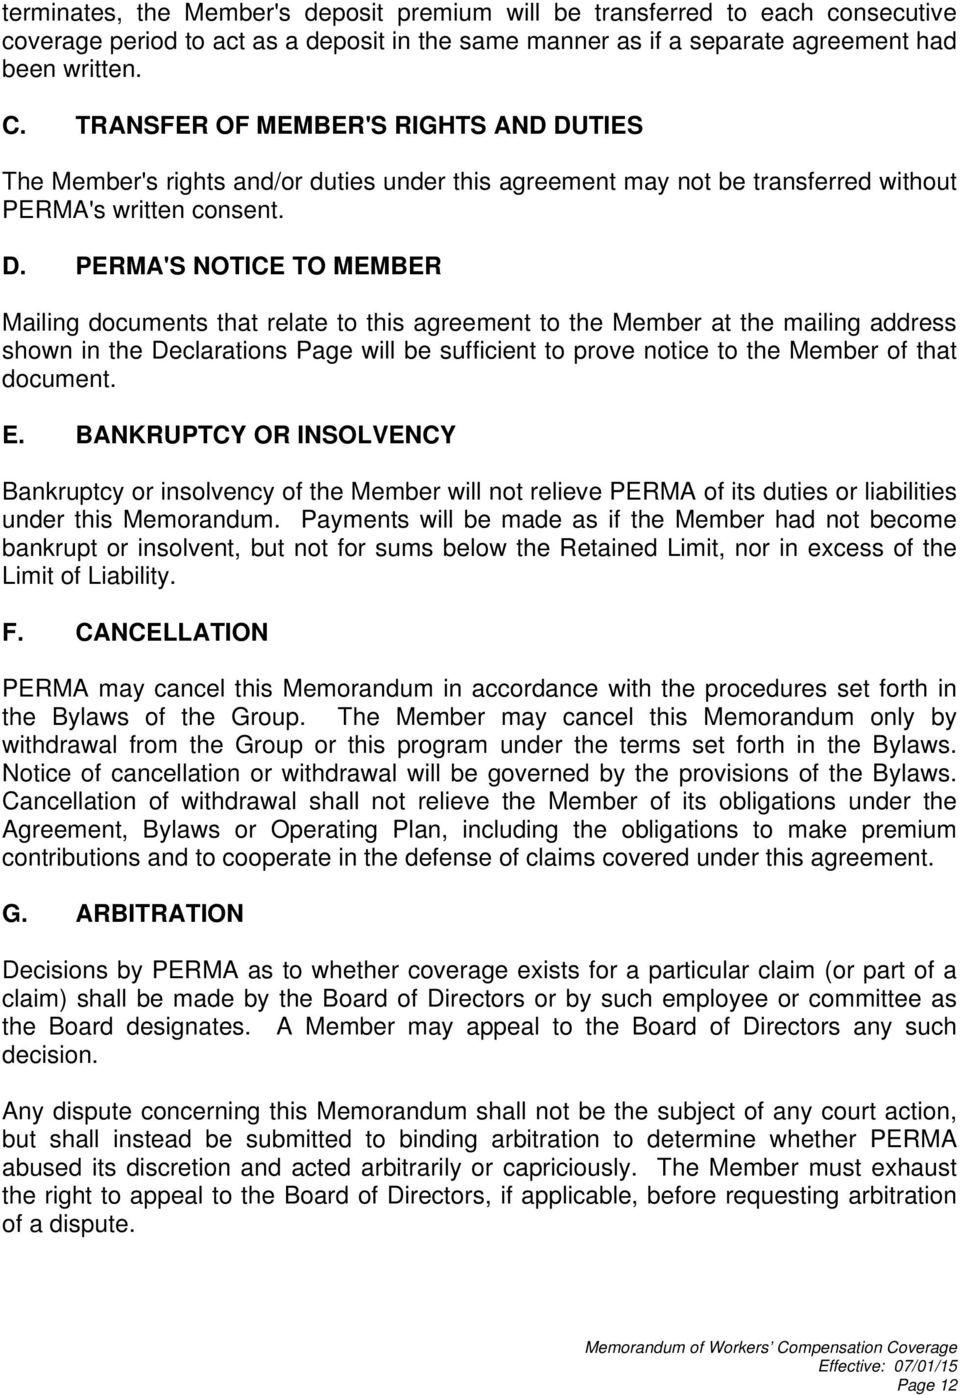 TIES The Member's rights and/or duties under this agreement may not be transferred without PERMA's written consent. D.